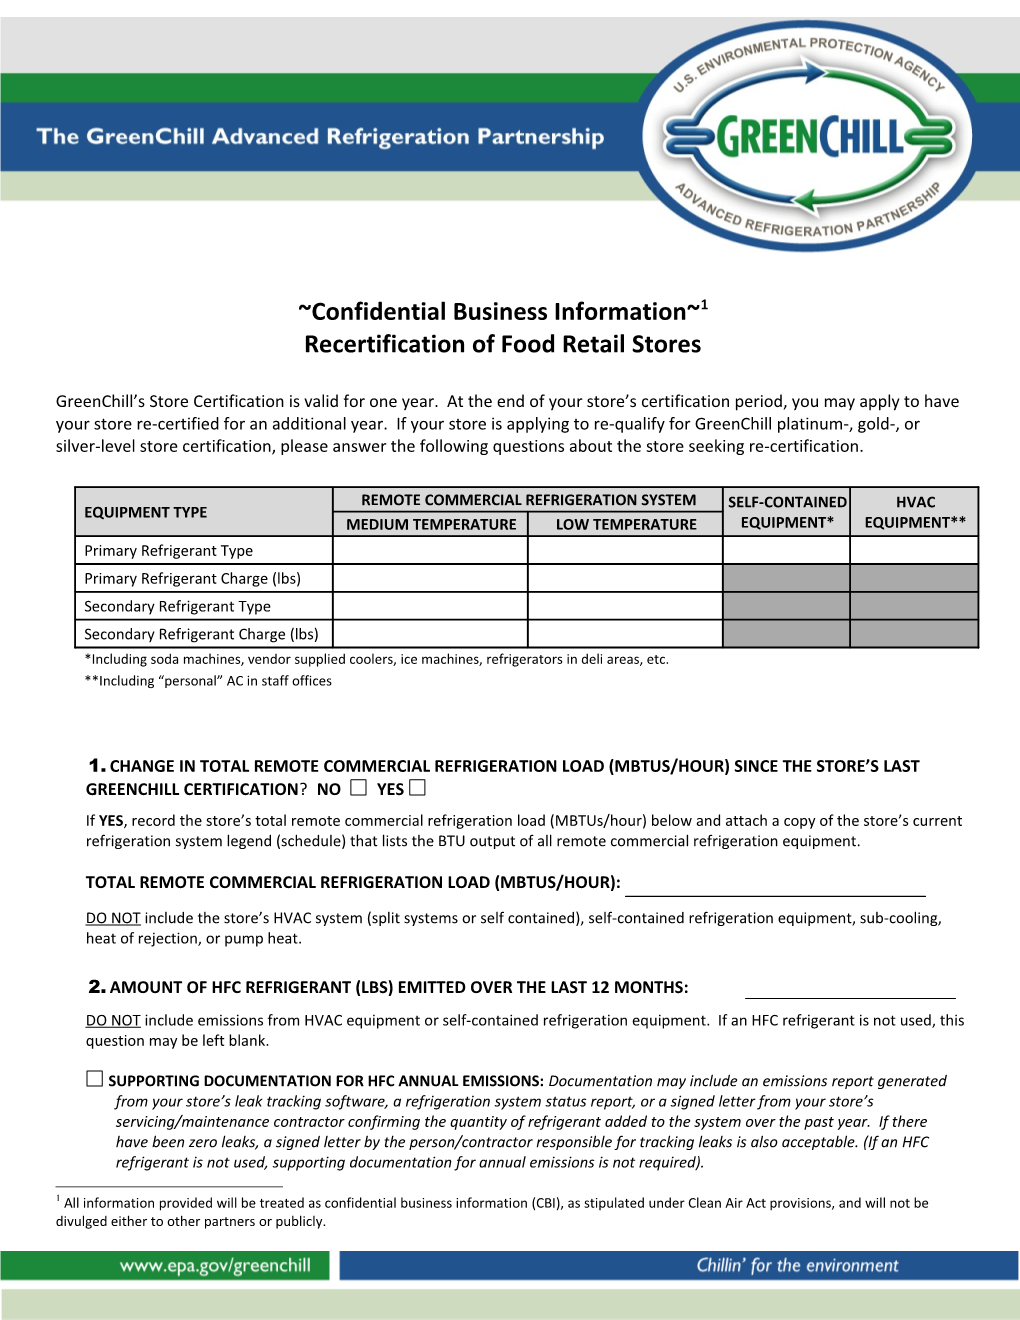 Recertification of Food Retail Stores